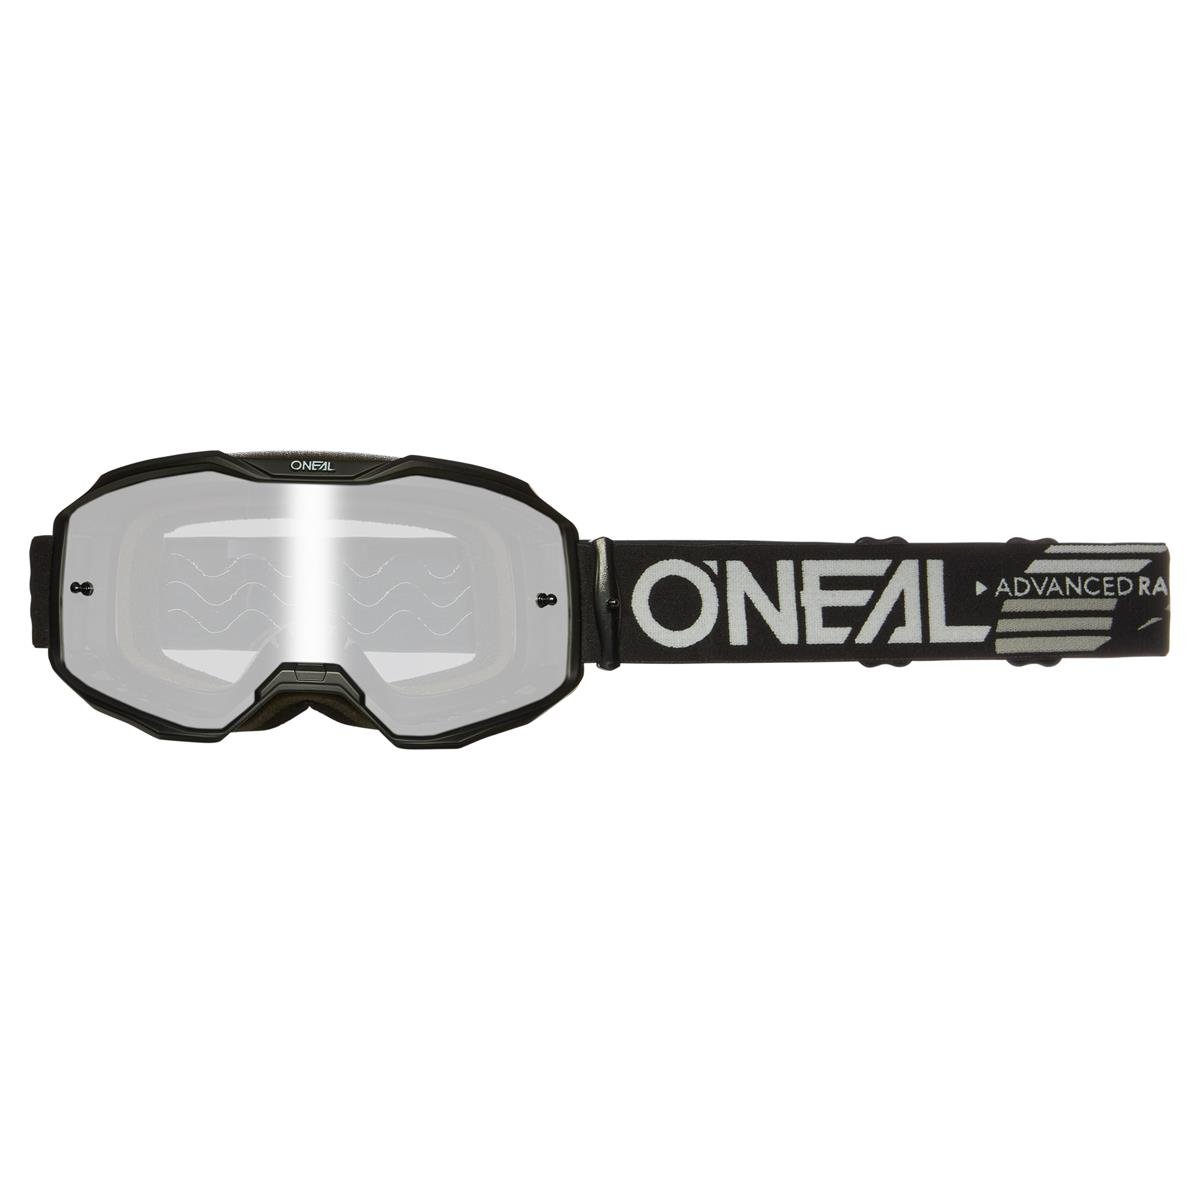 O'Neal Masque B10 Solid Black - Argent des Miroirs